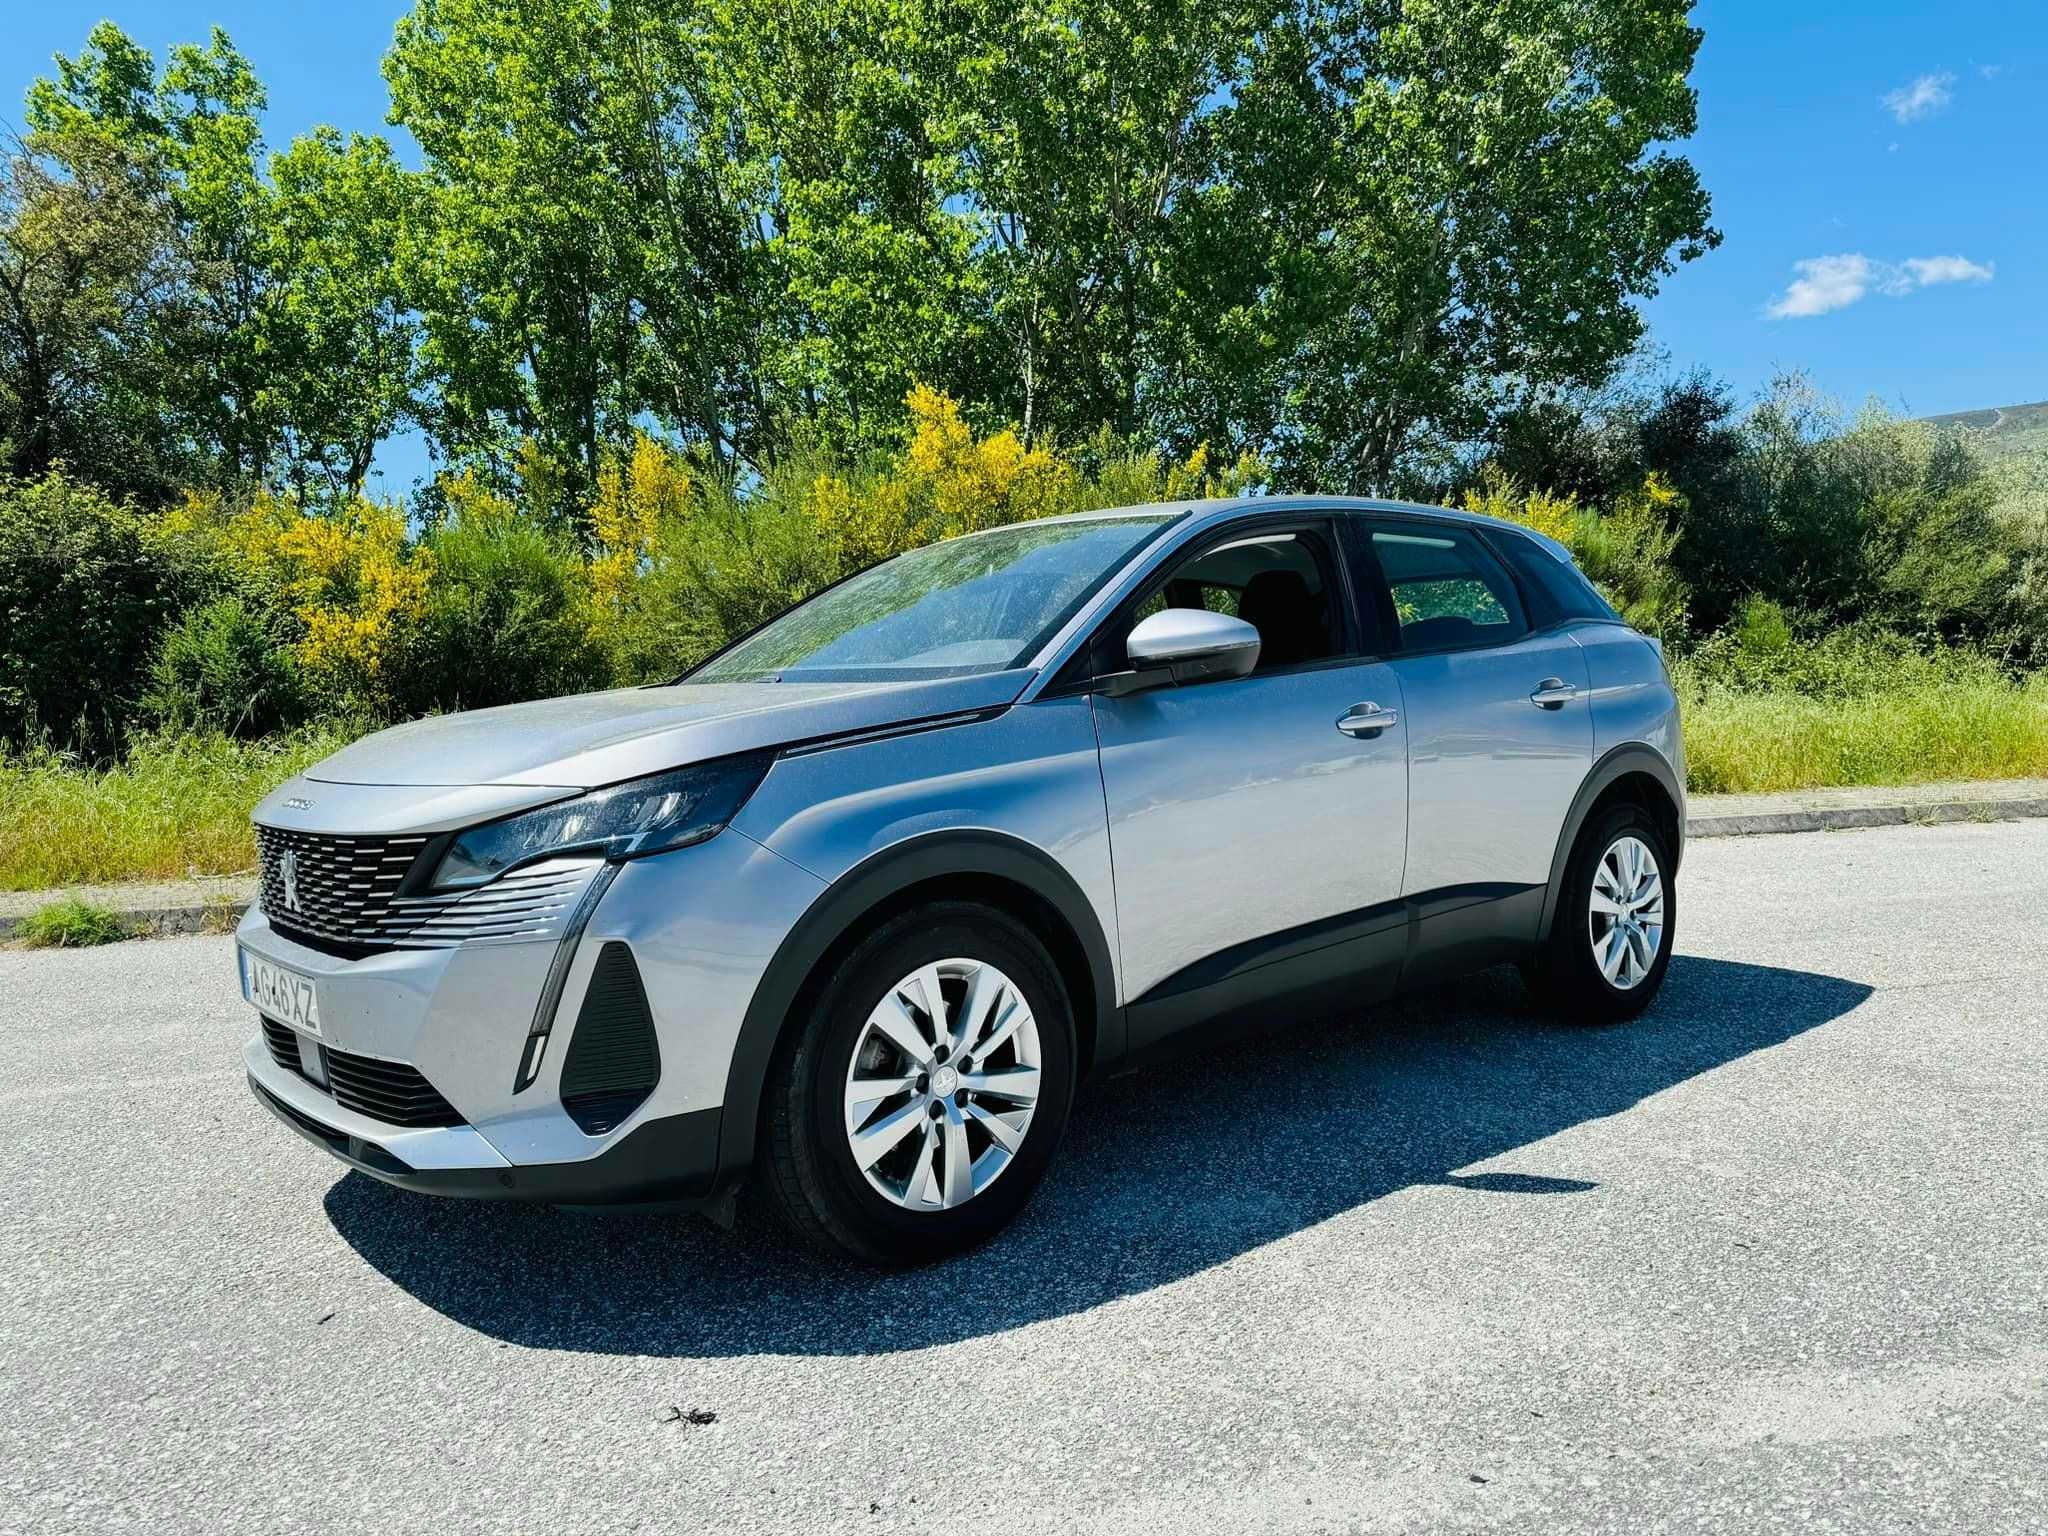 Peugeot 3008 Active 1.5 HDI